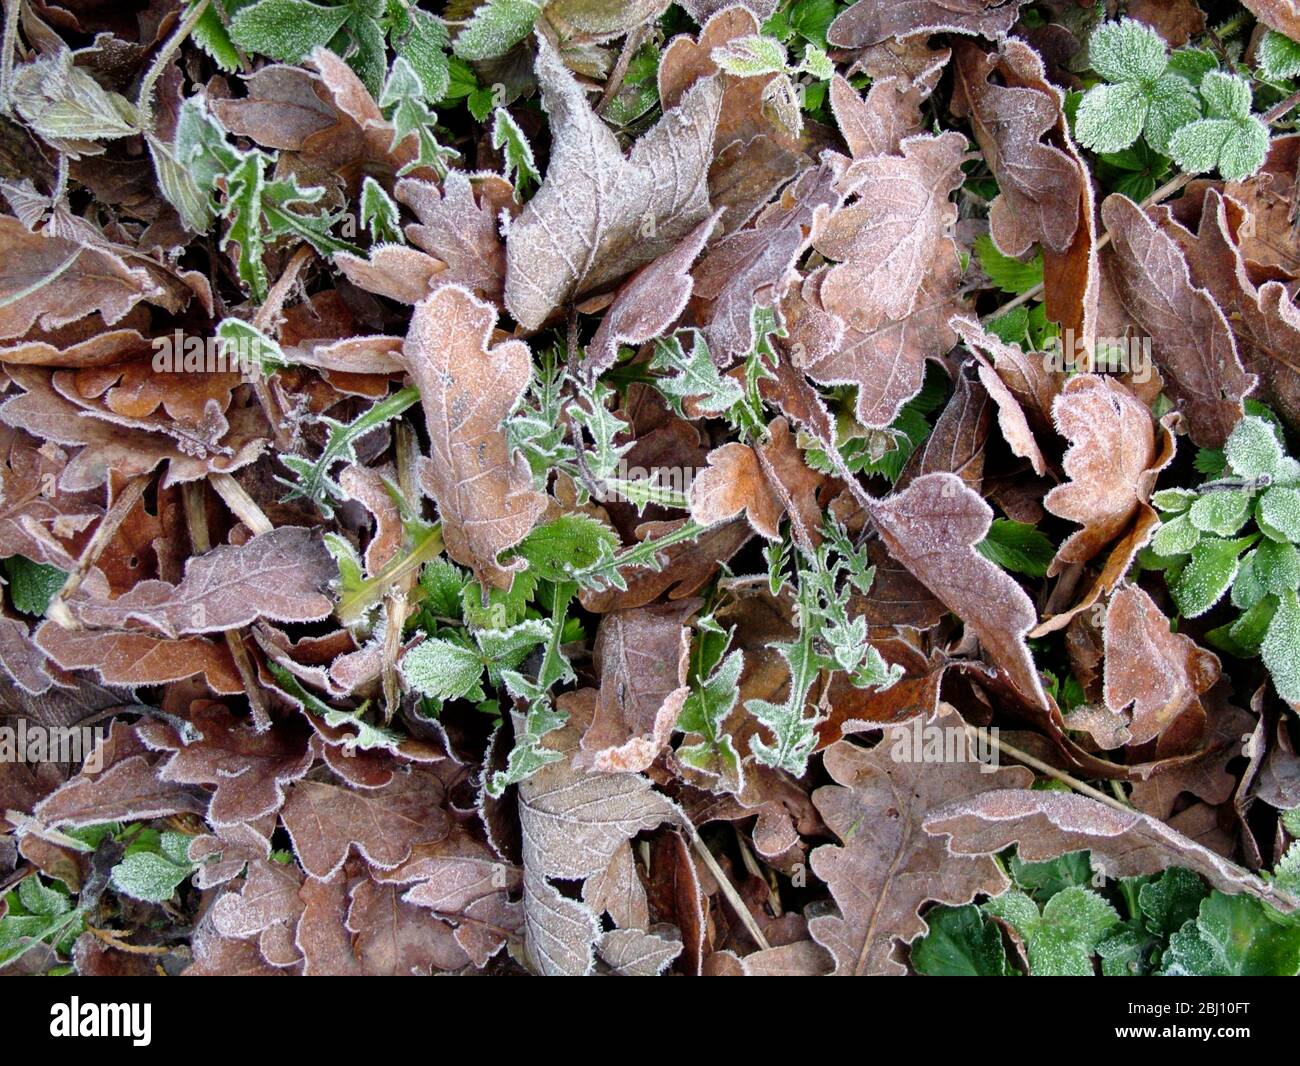 Frozen ground in January with autumn leaves and spring shoots. Kent England UK - Stock Photo